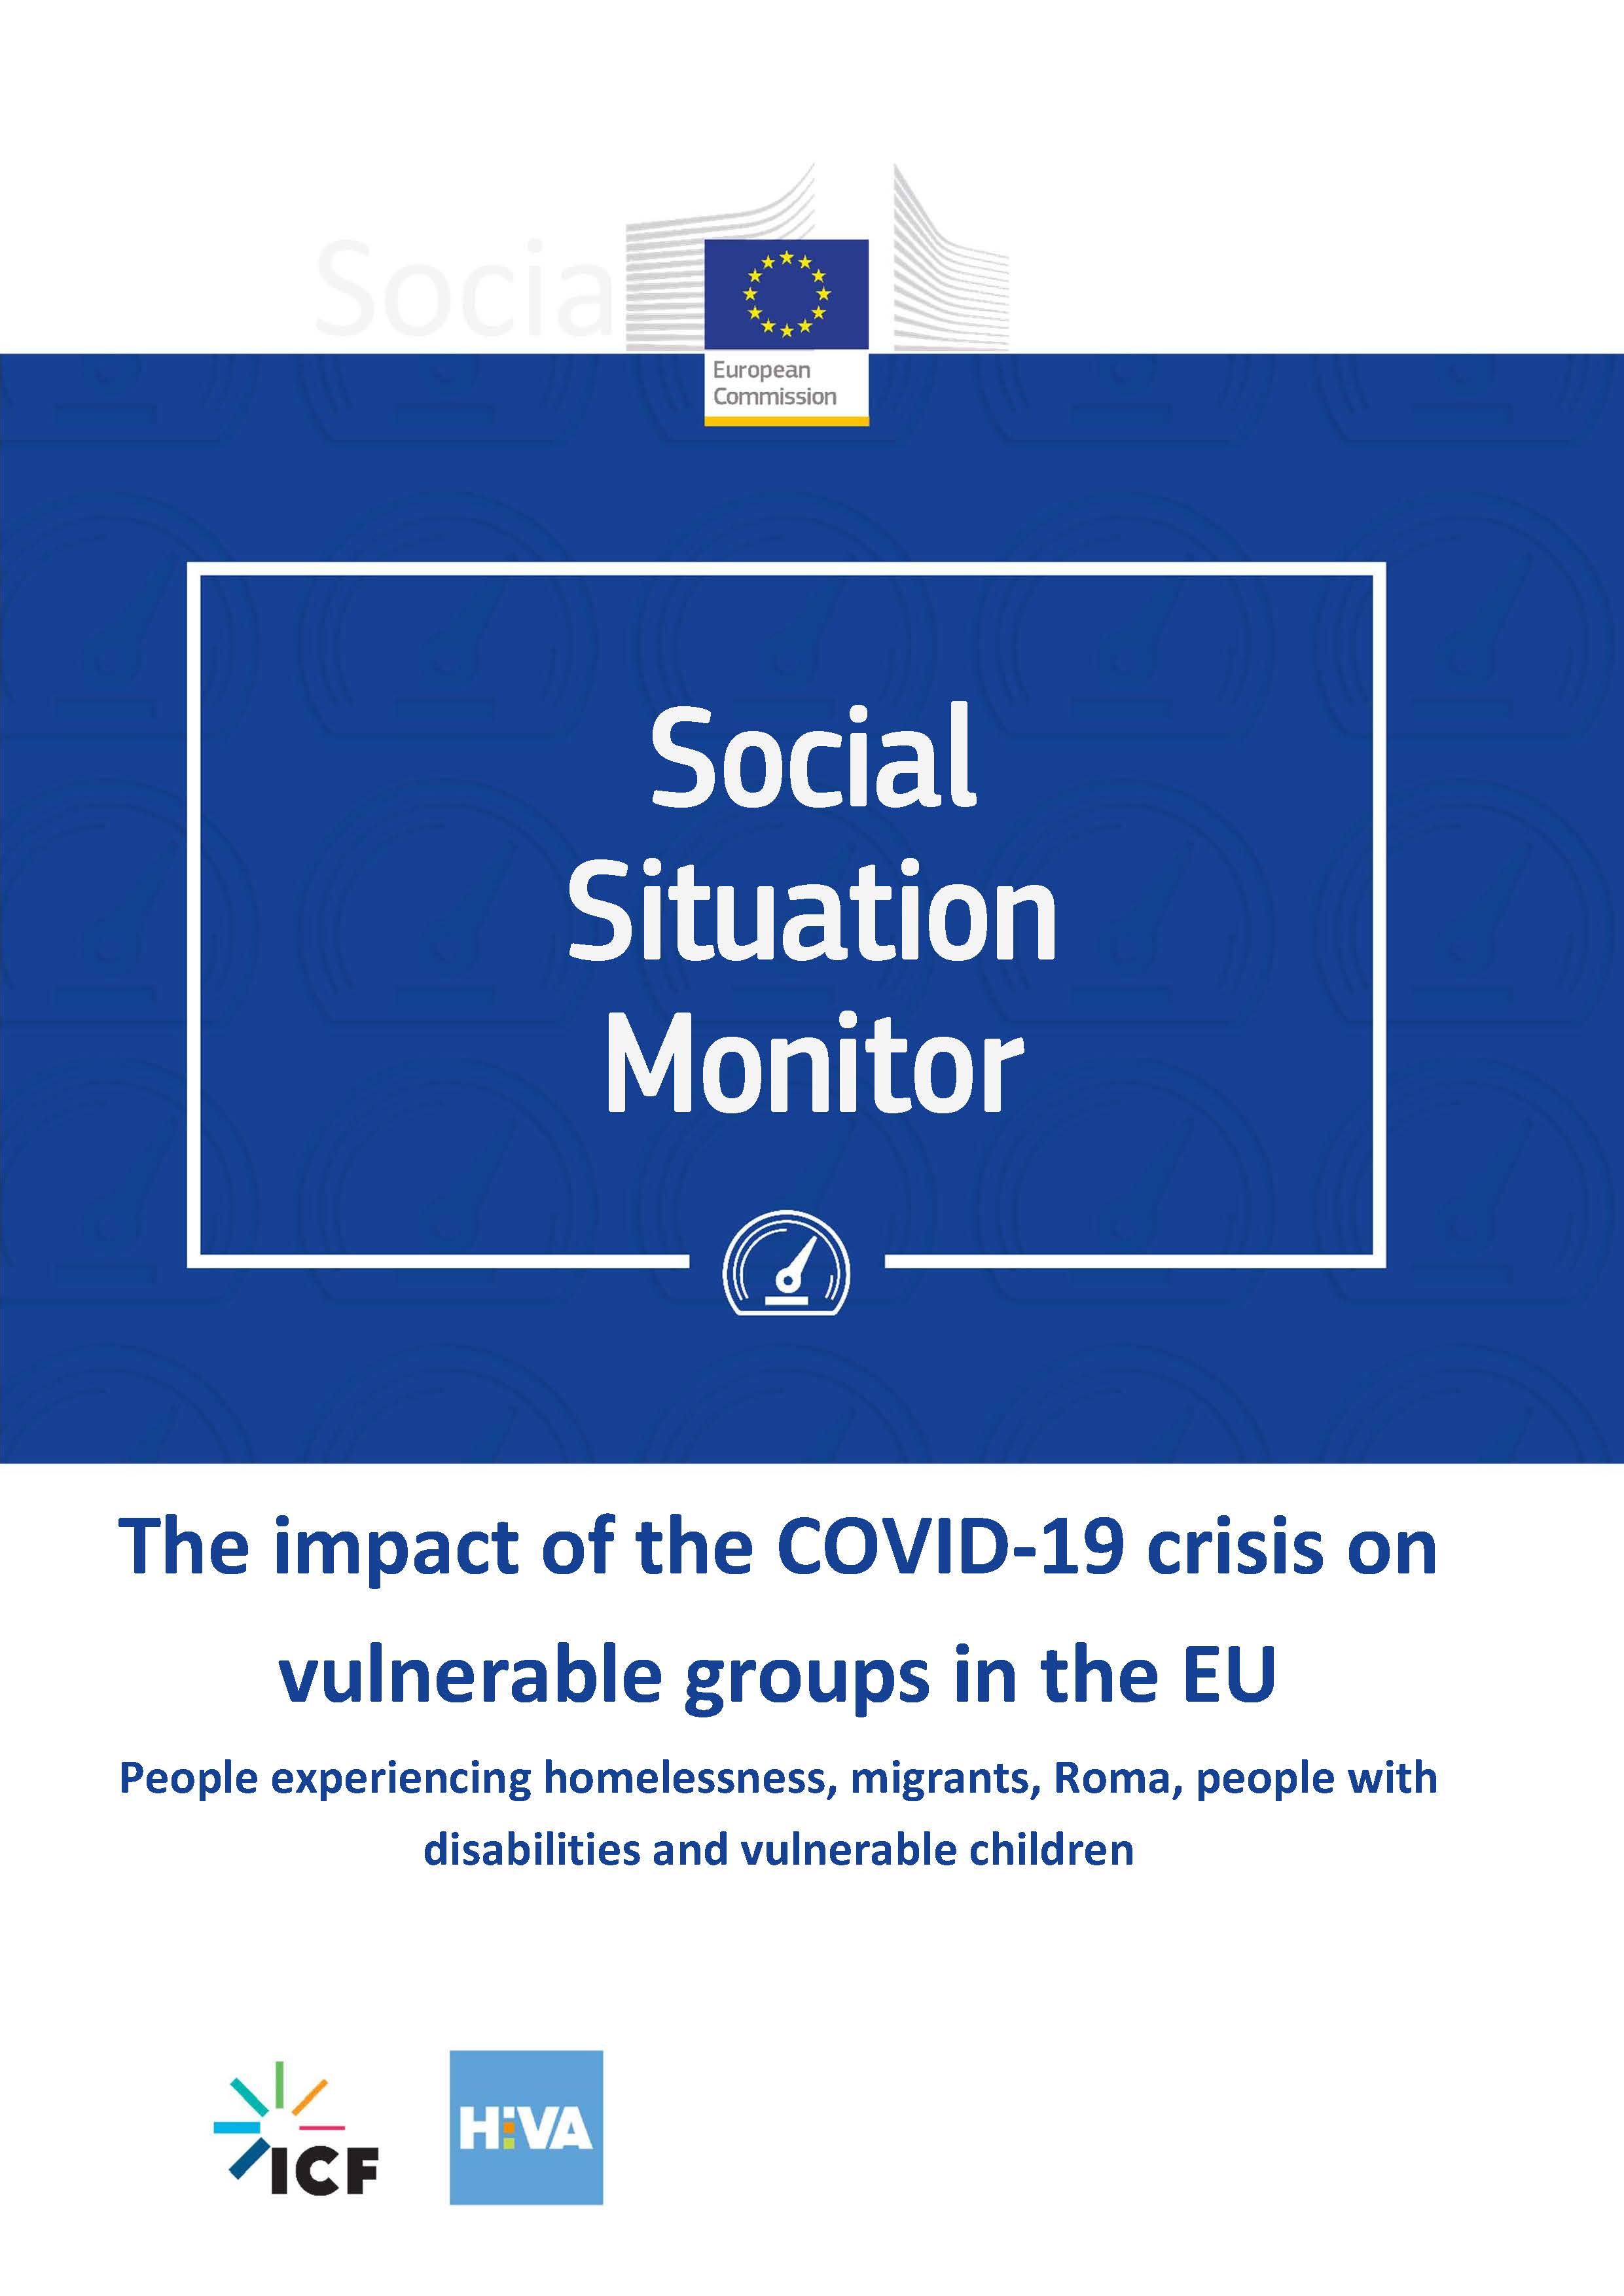 The impact of the COVID-19 crisis on vulnerable groups in the EU